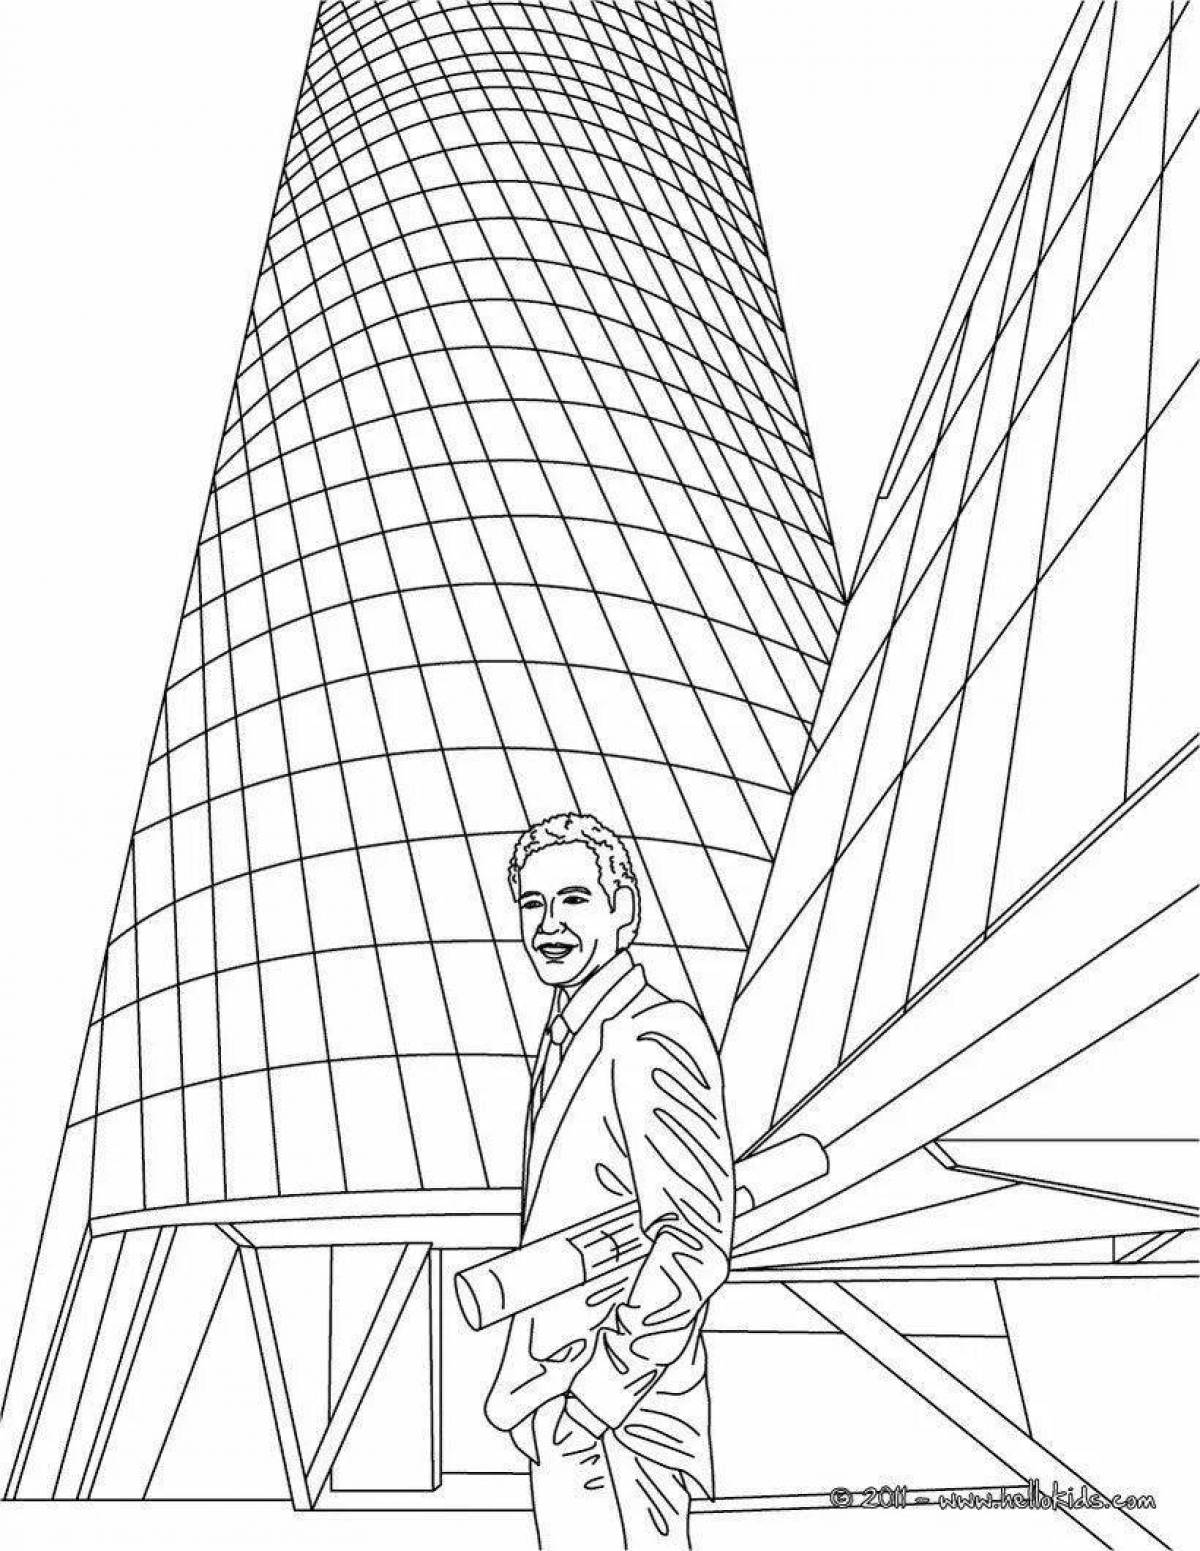 Fabulous skyscraper coloring pages for kids